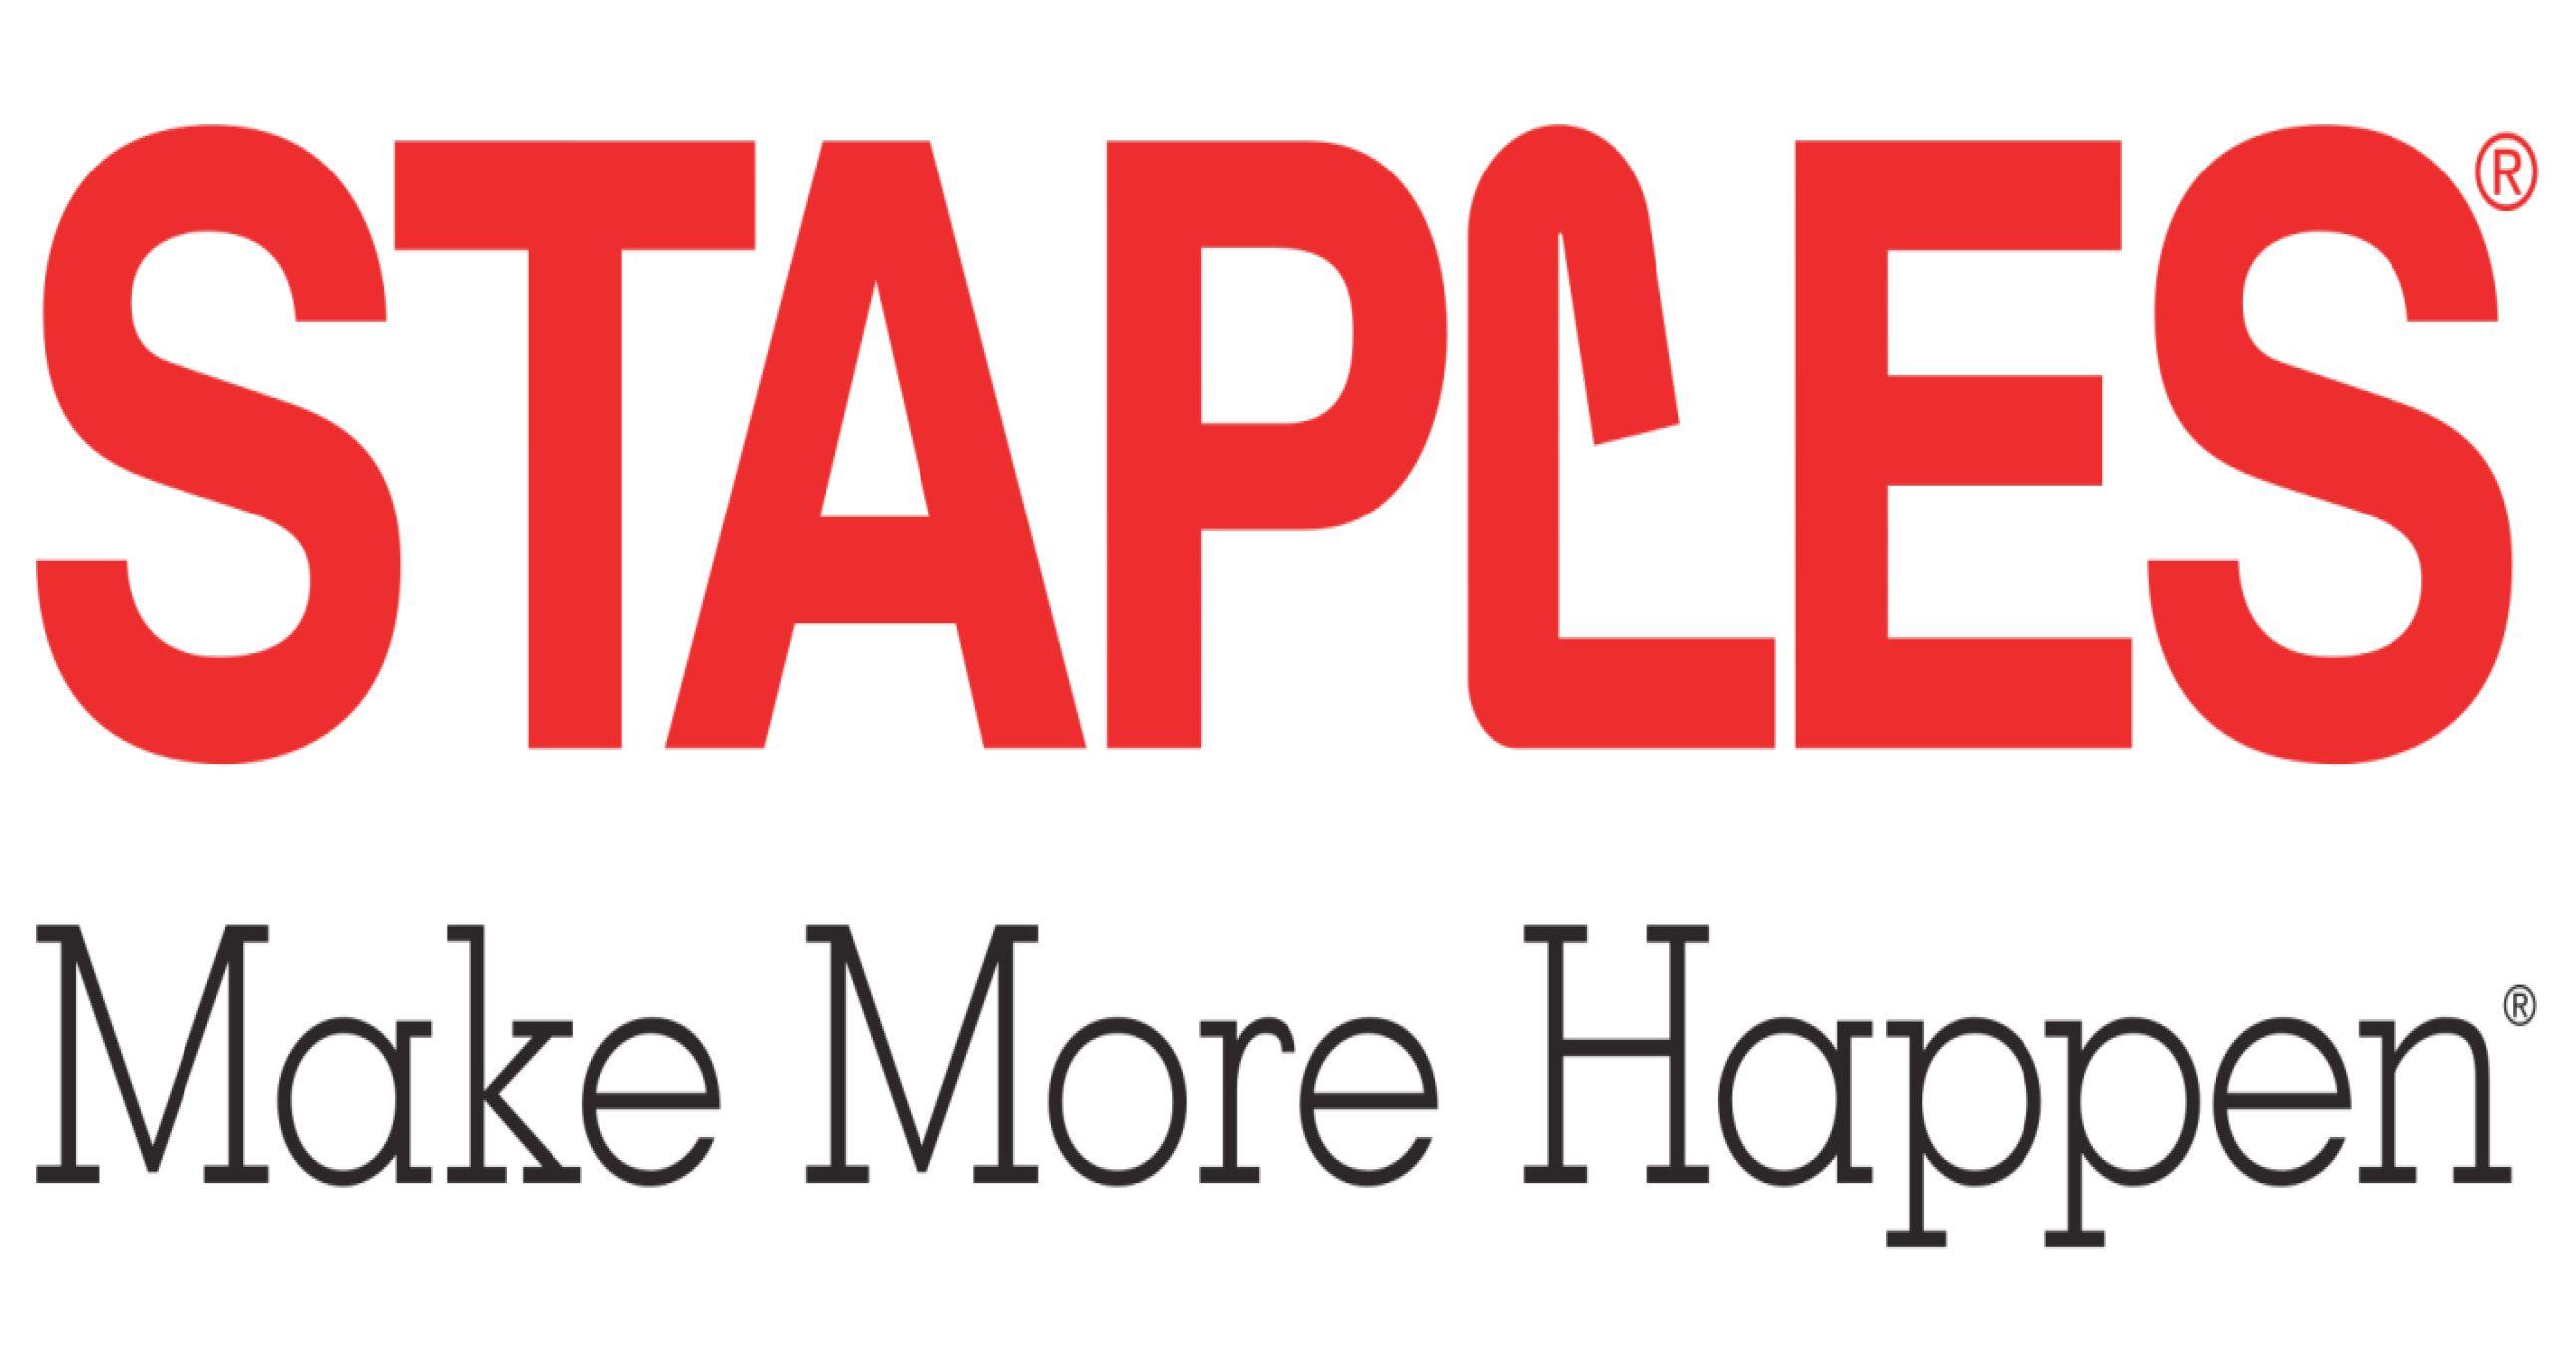 Make More Happen Staples Logo - Staples Print and Marketing Center will be having some amazing deals